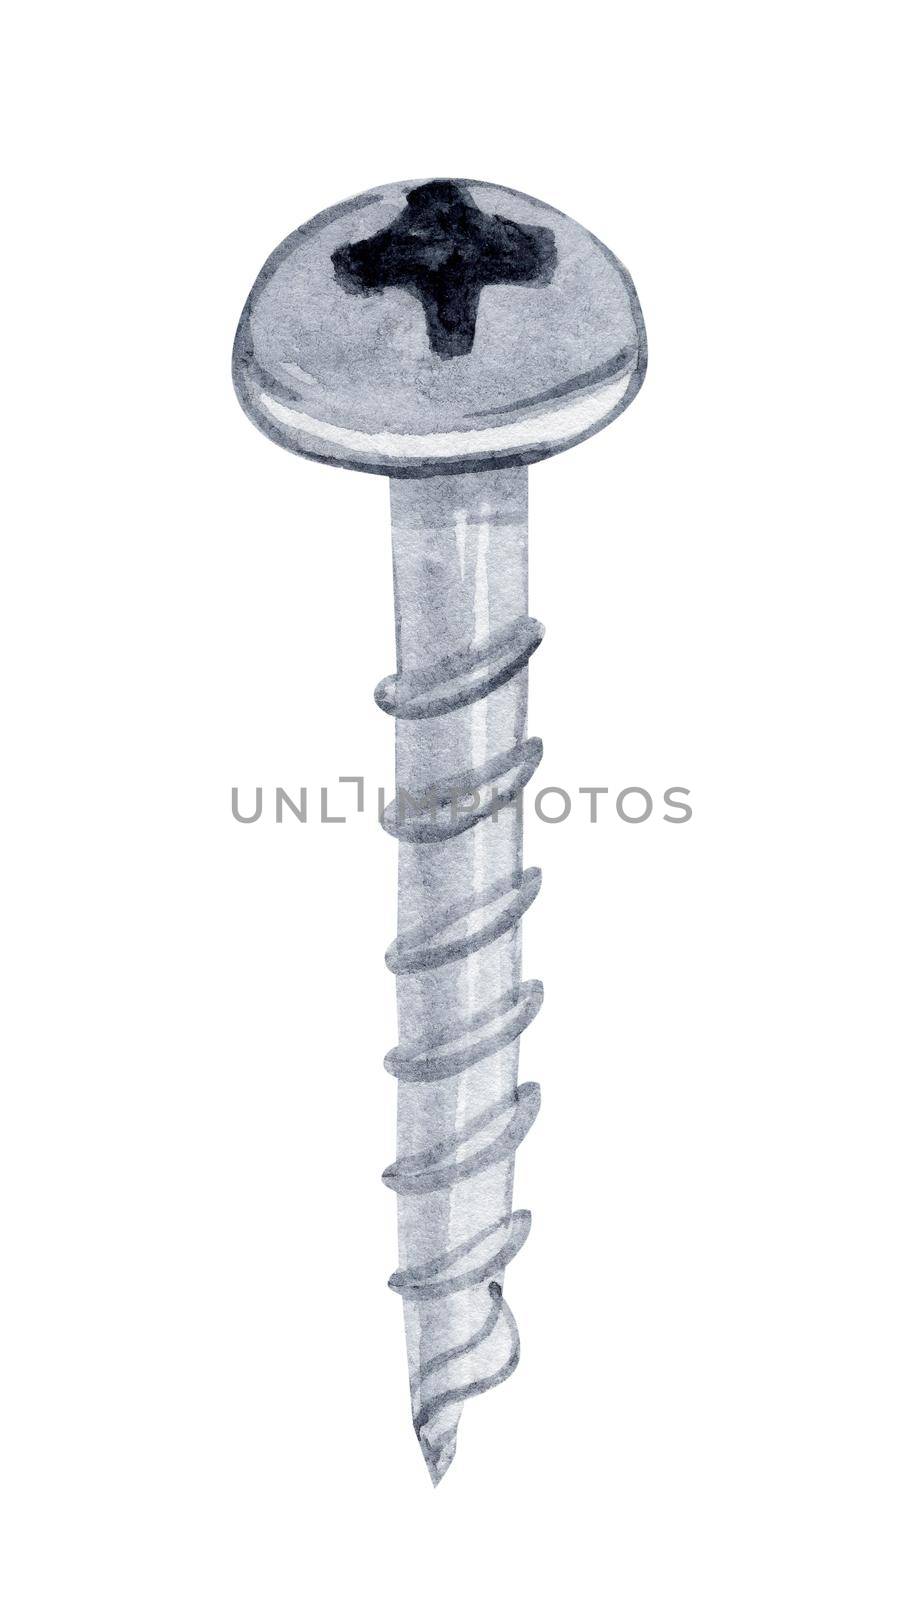 Watercolor metal screw isolated on white background